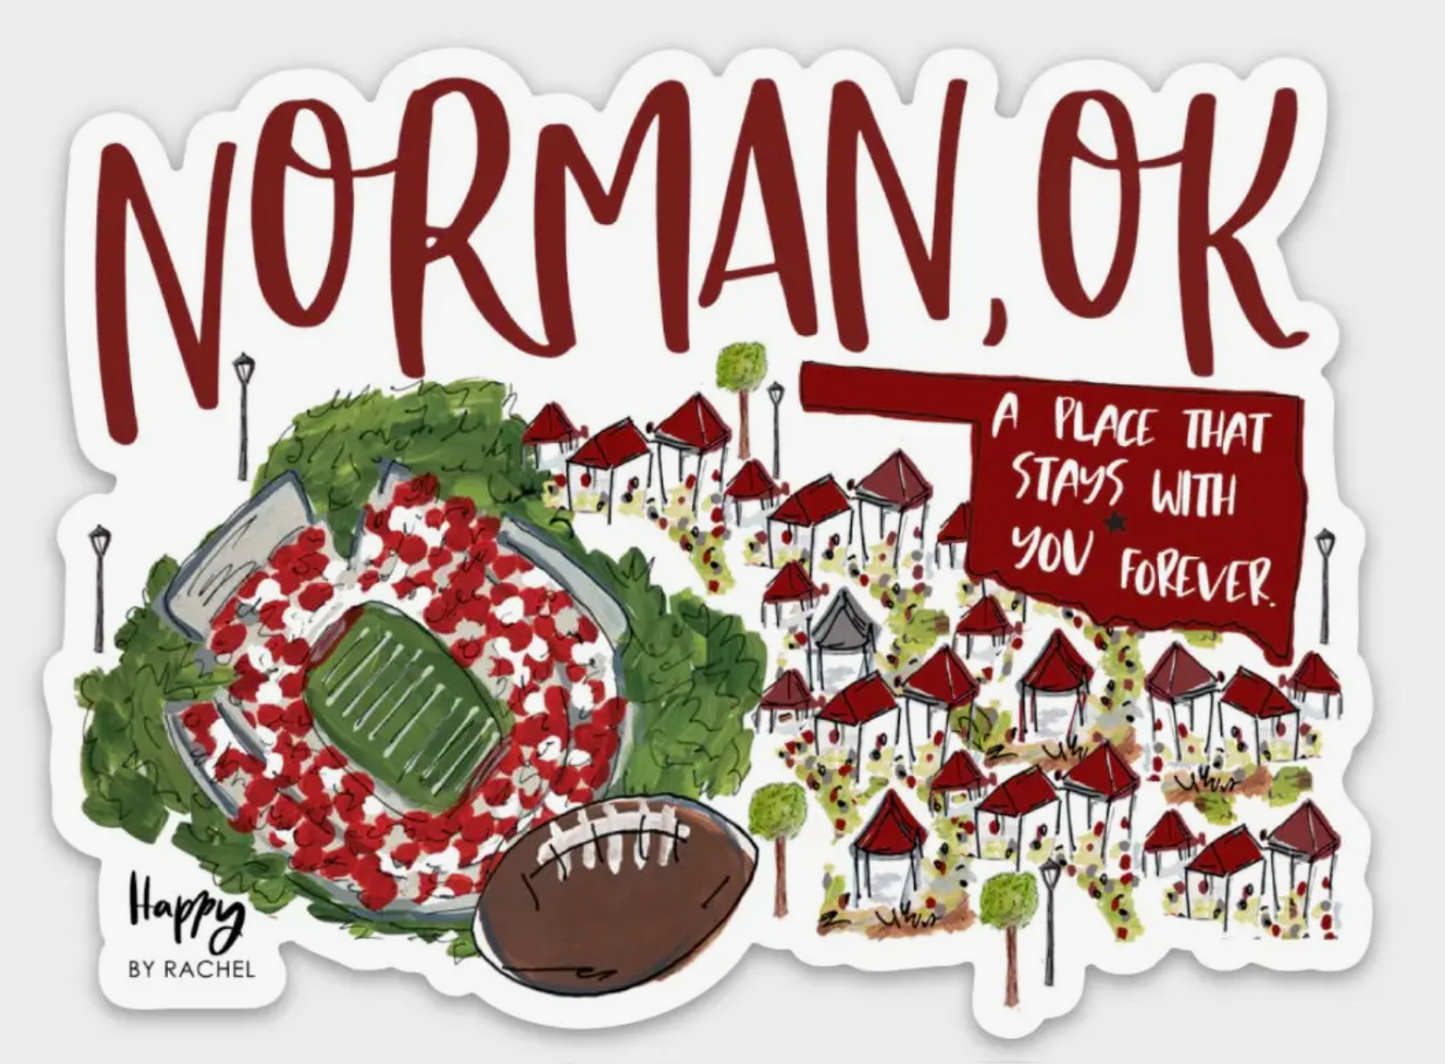 Welcome to Norman!